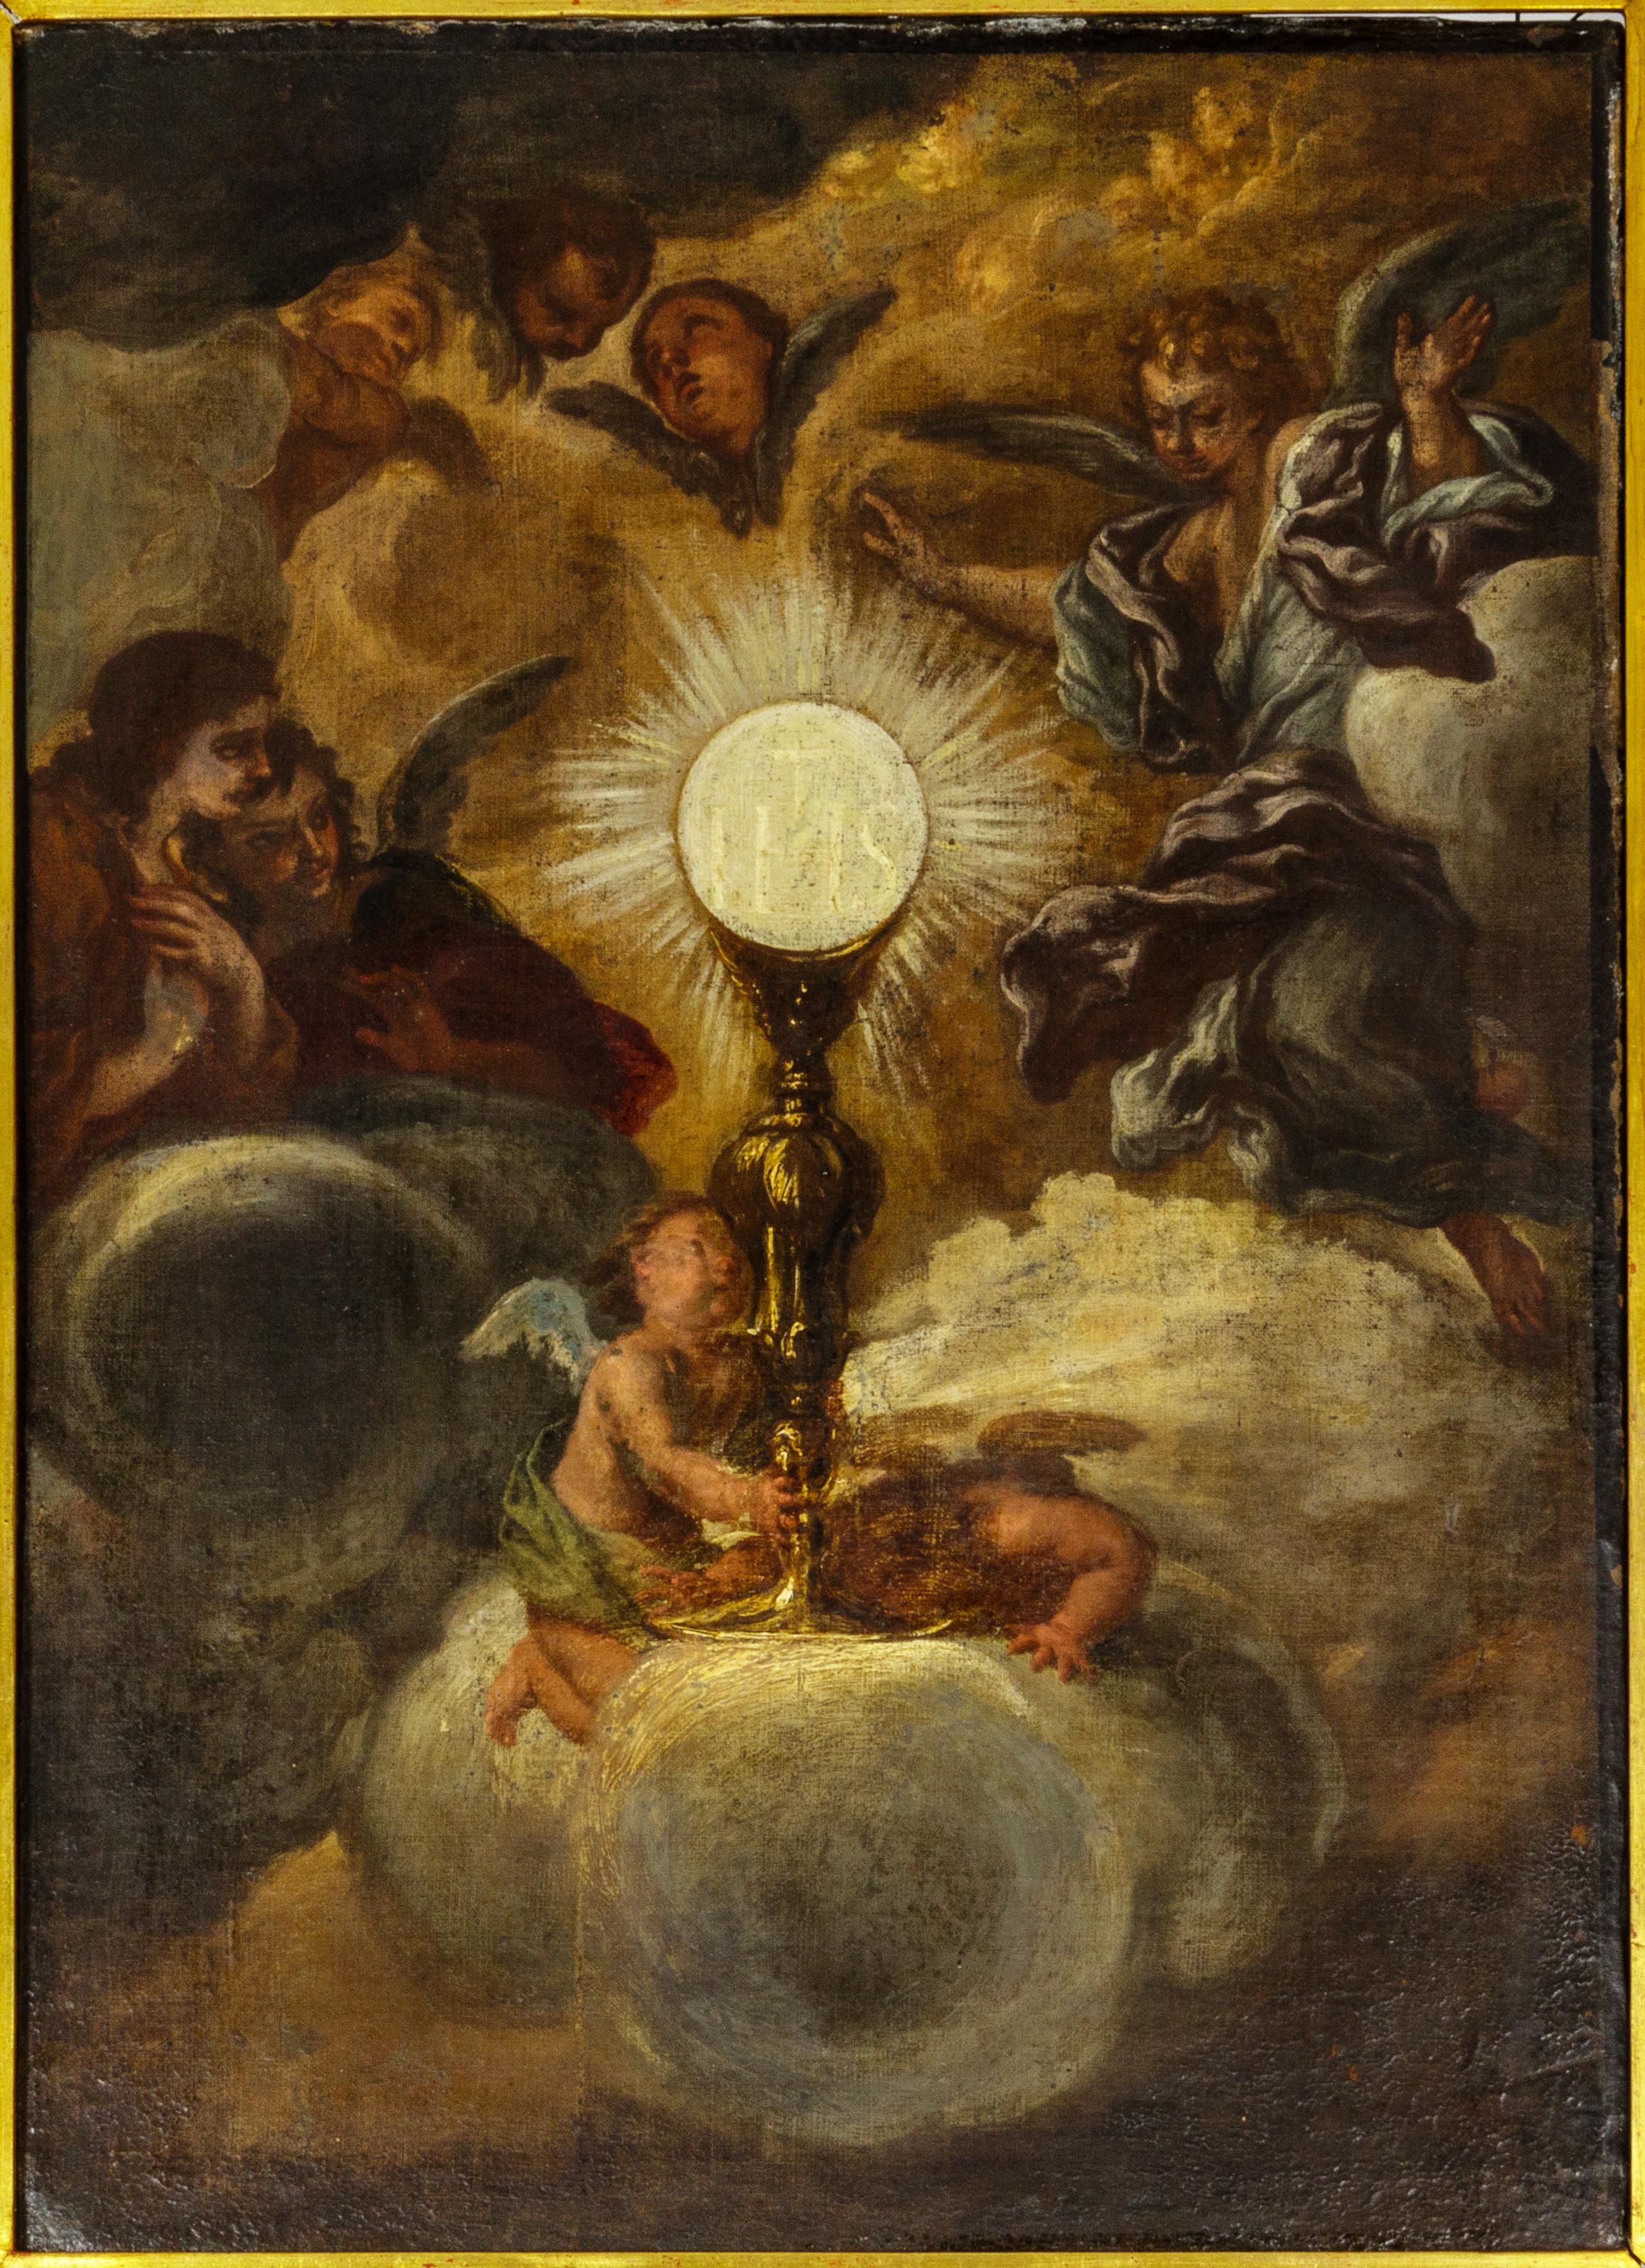 A painting, prior to 1678, from a famous fresco of the Triumph of the Name of Jesus from the Gesù Church in Rome, completed in 1684, attributed to the Old Master Painter Giovanni Battista Gaulli, also known as Baciccio or Baciccia an Italian master